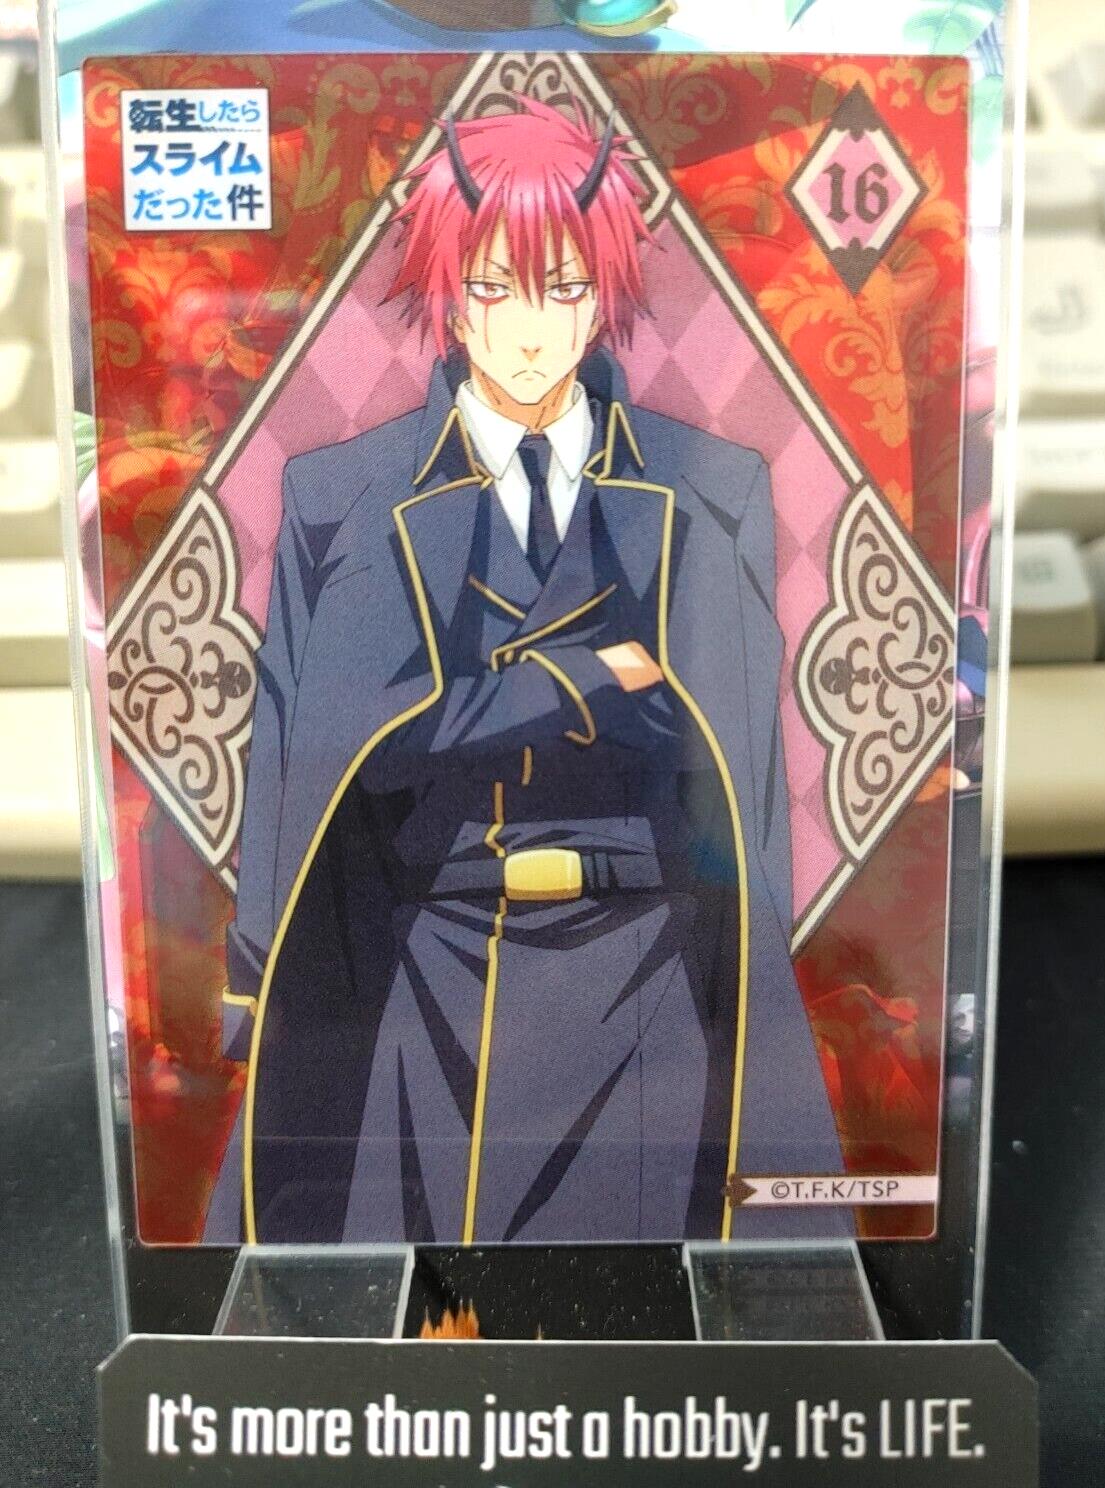 That Time I Got Reincarnated As A Slime Clear Card Collection Benimaru No. 16 JP